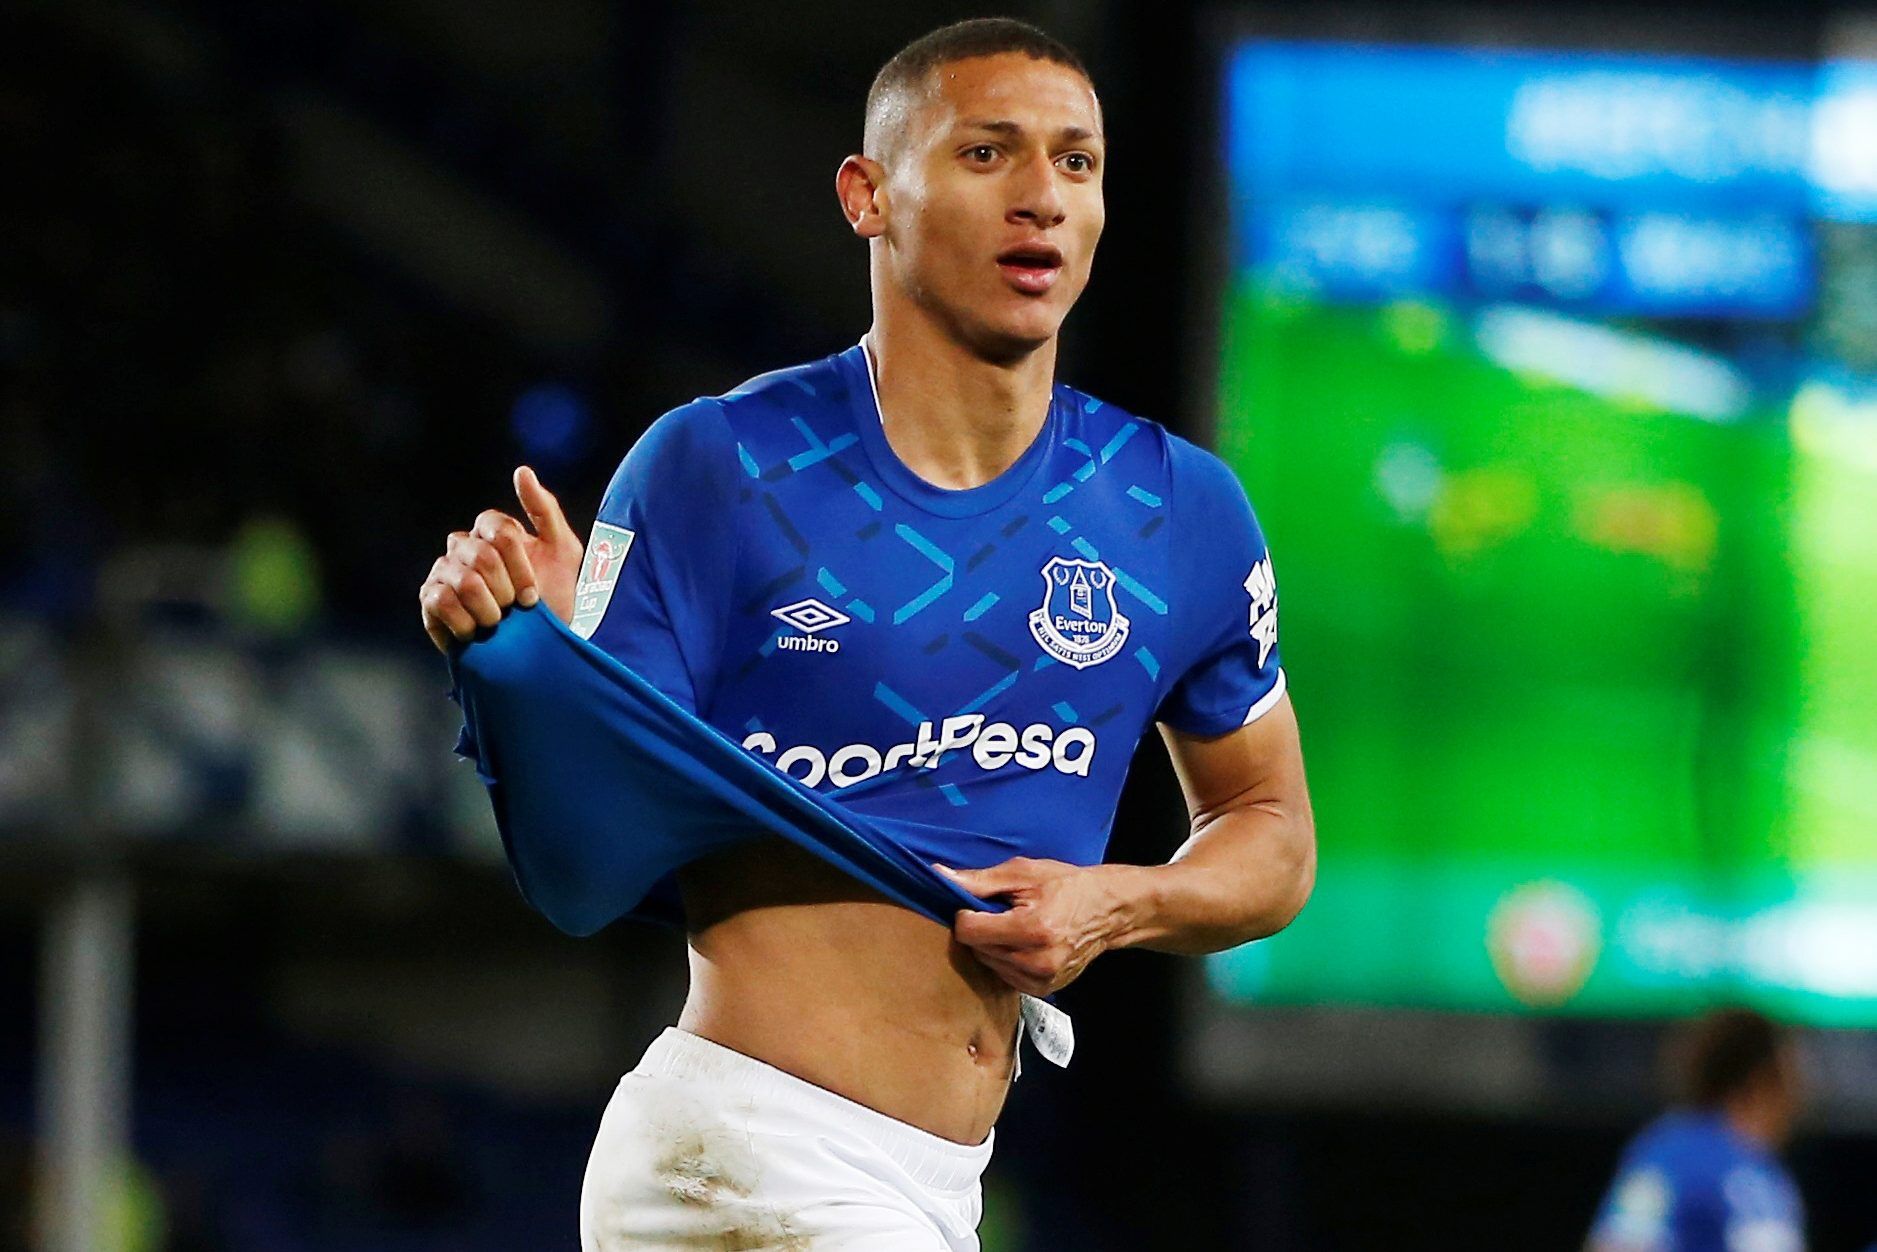 Soccer Football - Carabao Cup - Fourth Round - Everton v Watford - Goodison Park, Liverpool, Britain - October 29, 2019  Everton's Richarlison celebrates scoring their second goal                  Action Images via Reuters/Craig Brough  EDITORIAL USE ONLY. No use with unauthorized audio, video, data, fixture lists, club/league logos or 